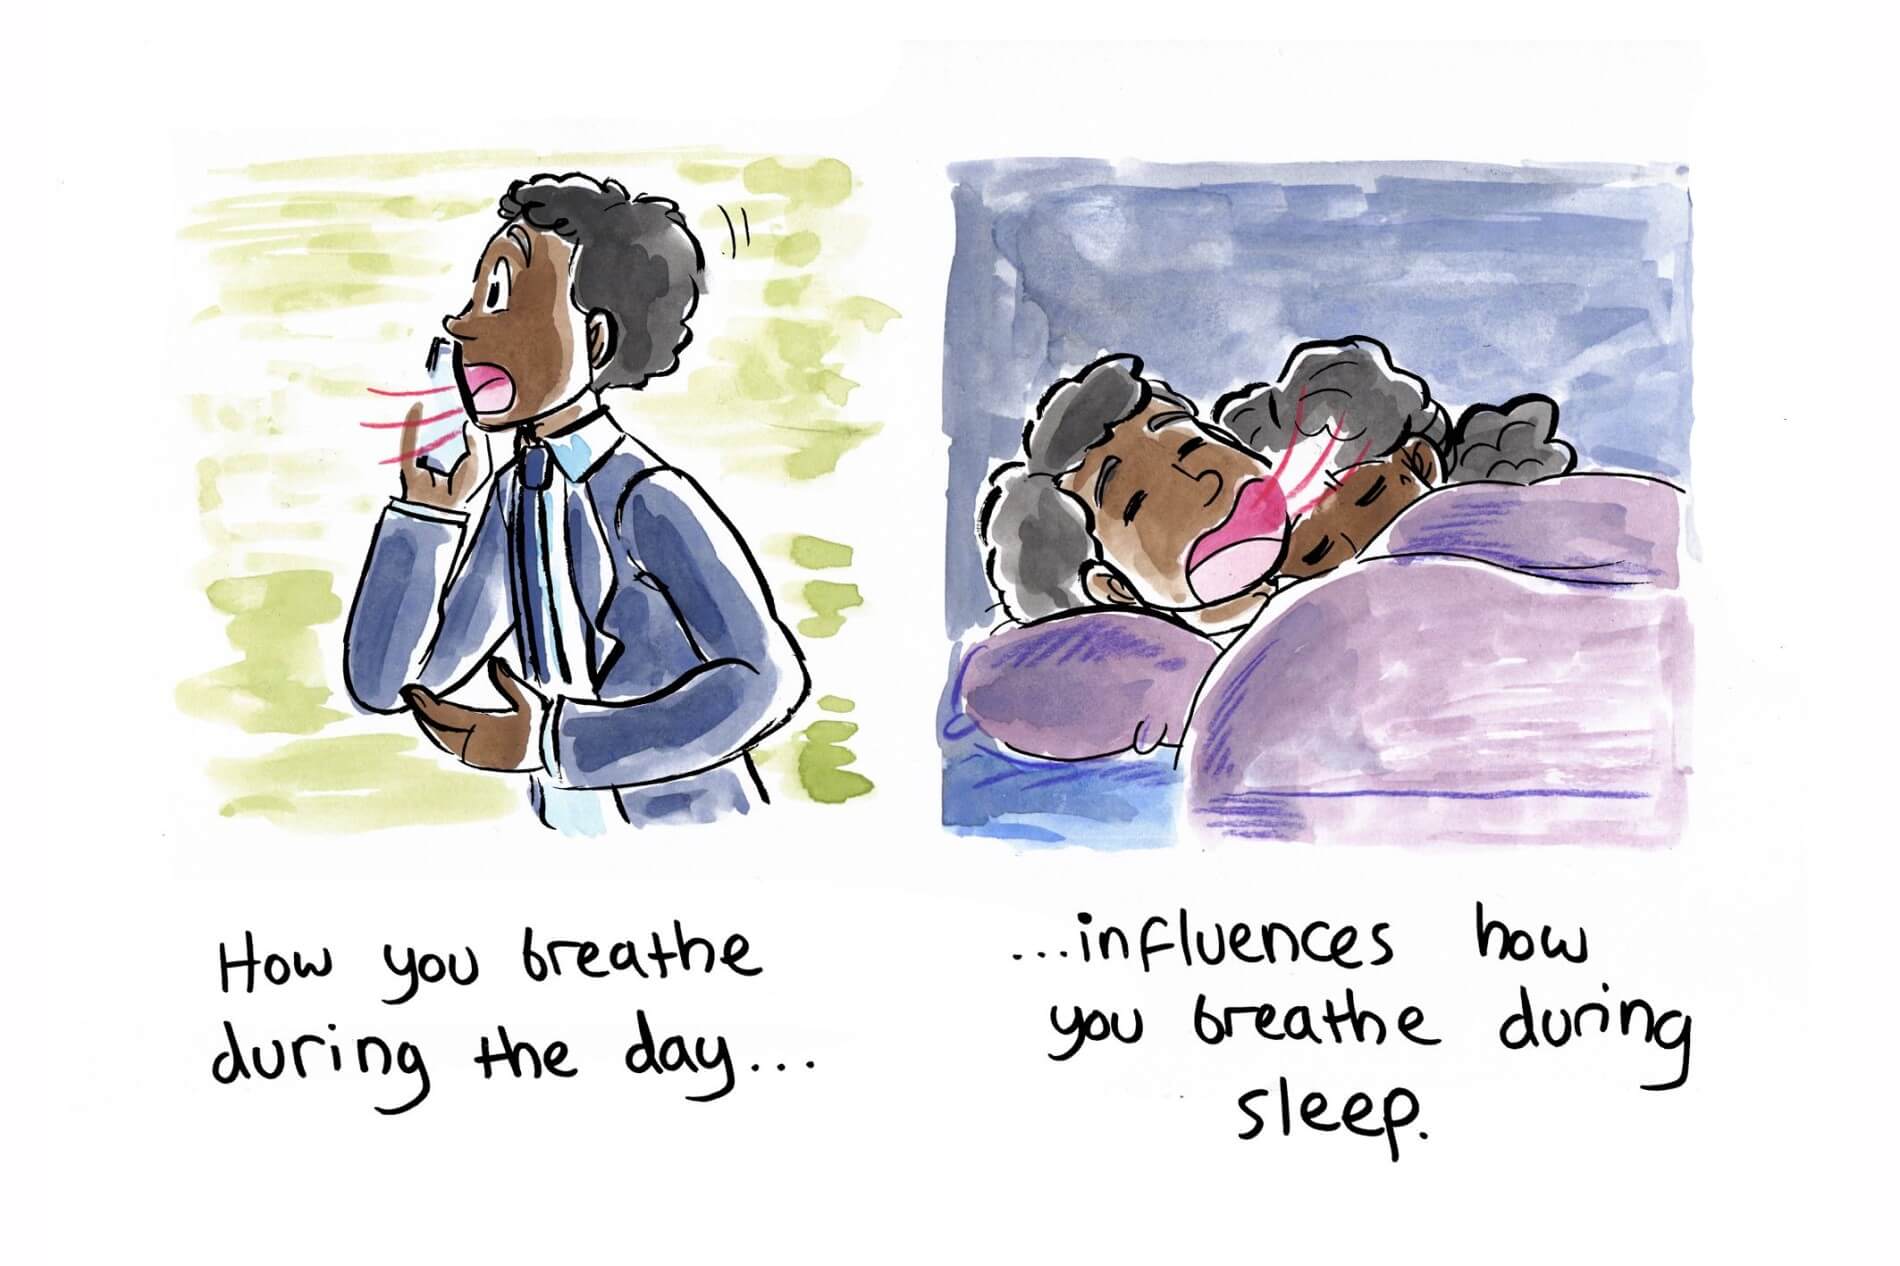 Night-day mouth breathing and quality of sleep